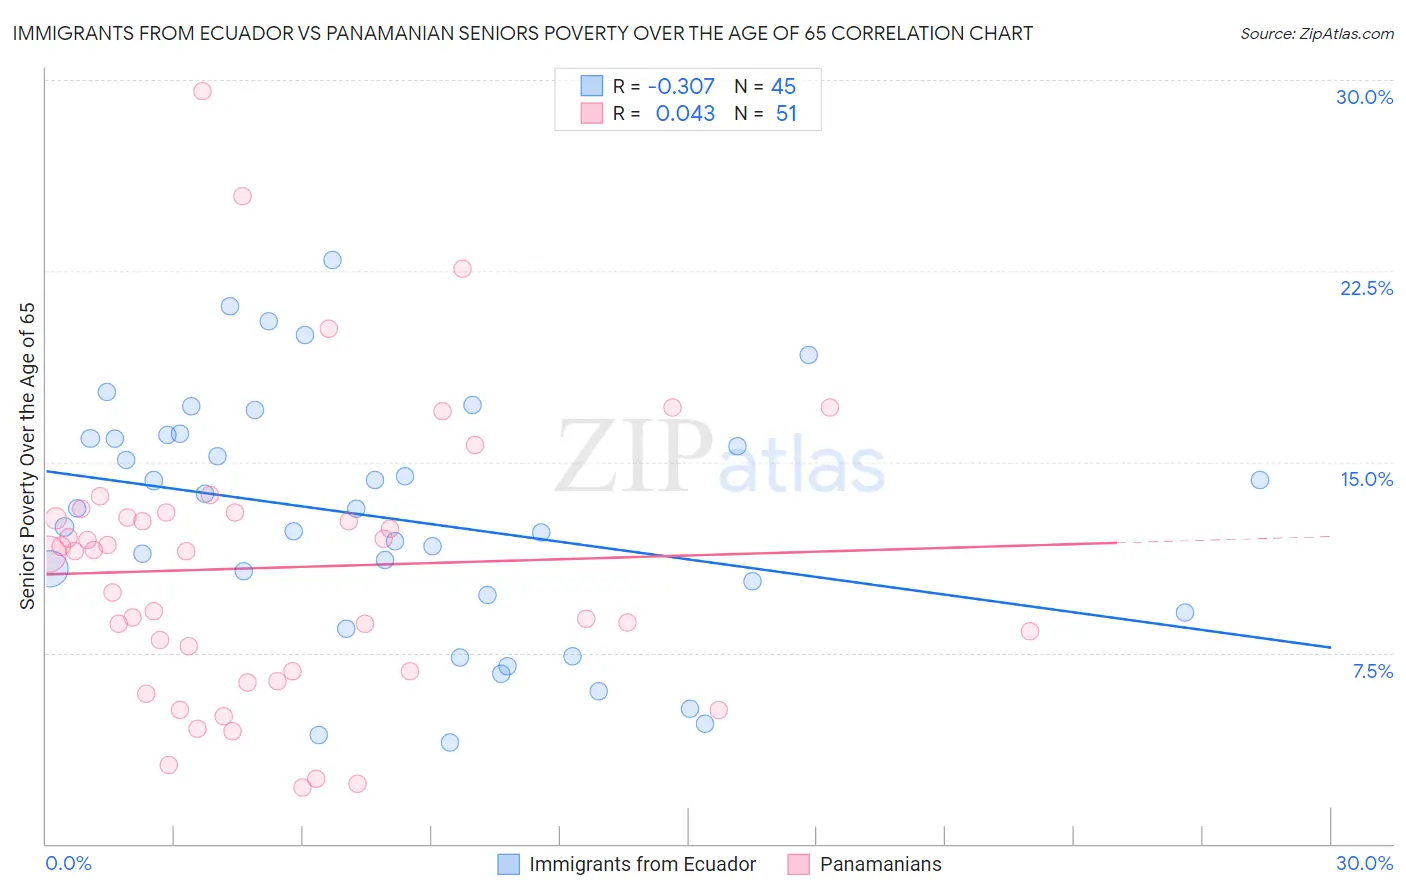 Immigrants from Ecuador vs Panamanian Seniors Poverty Over the Age of 65